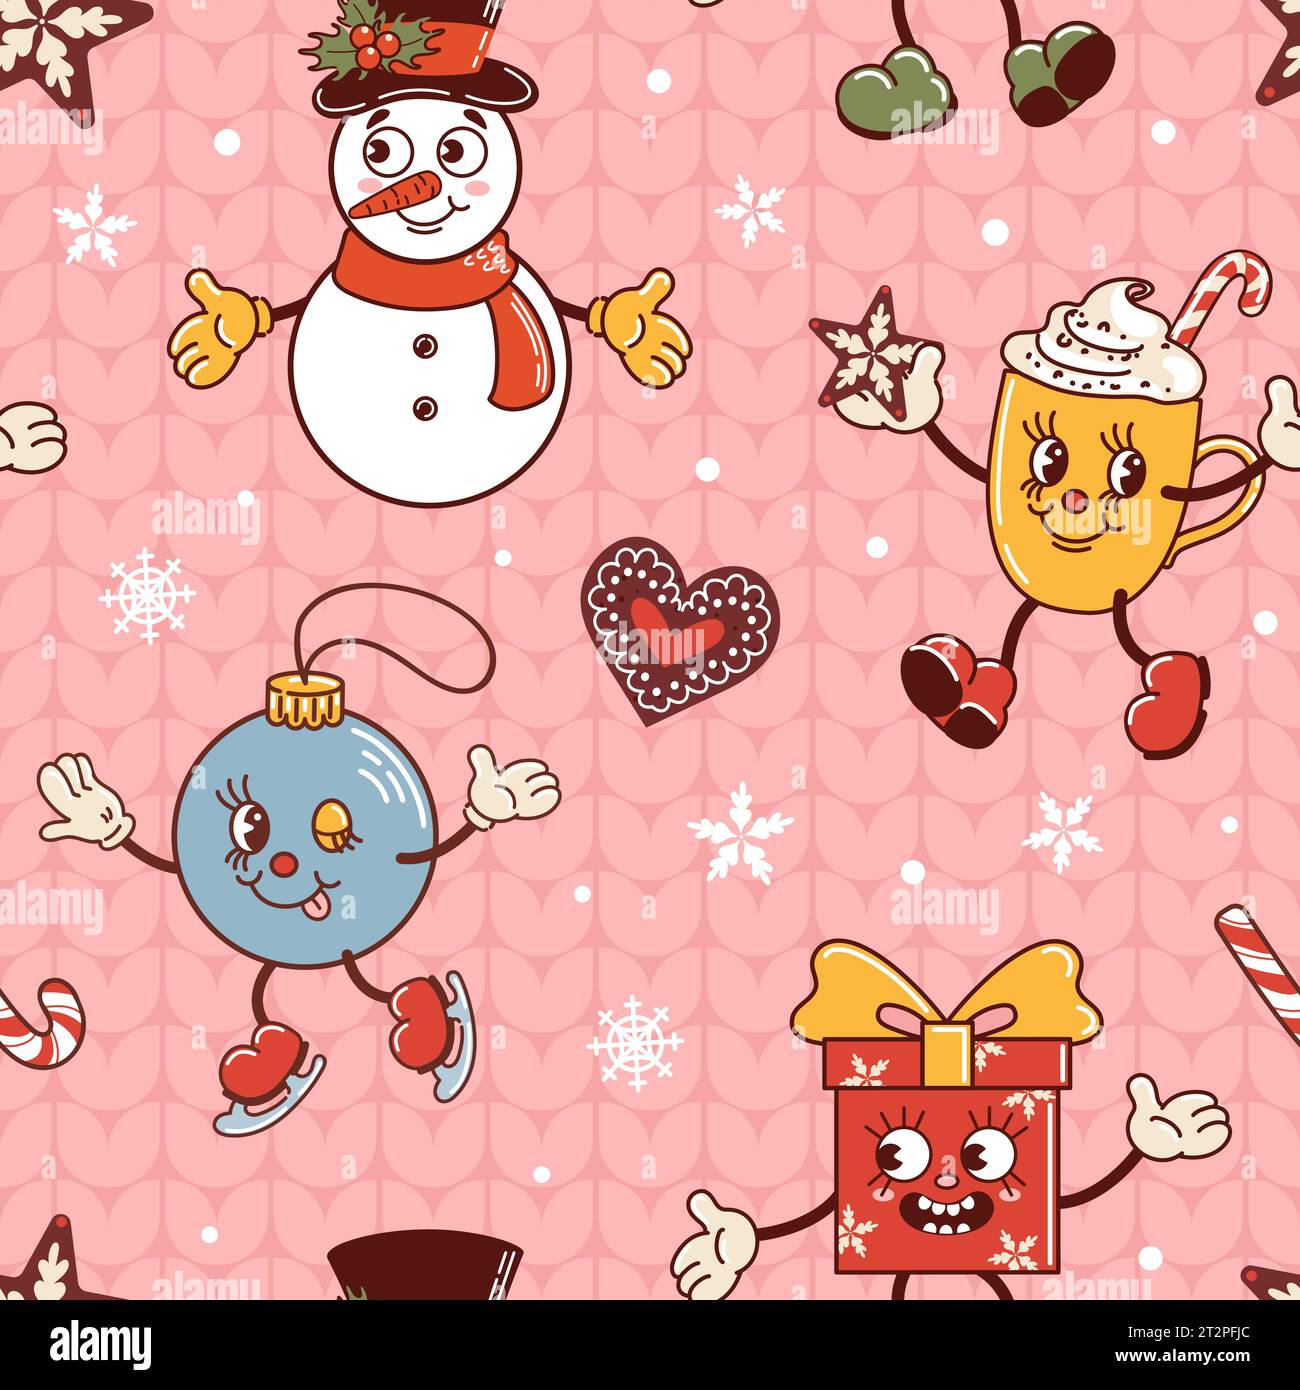 Snowman, gift and hot chocolate mug dancing, ball is skating. Cute old retro cartoon style characters. Knitted ugly sweater. Seamless pattern for wall Stock Vector